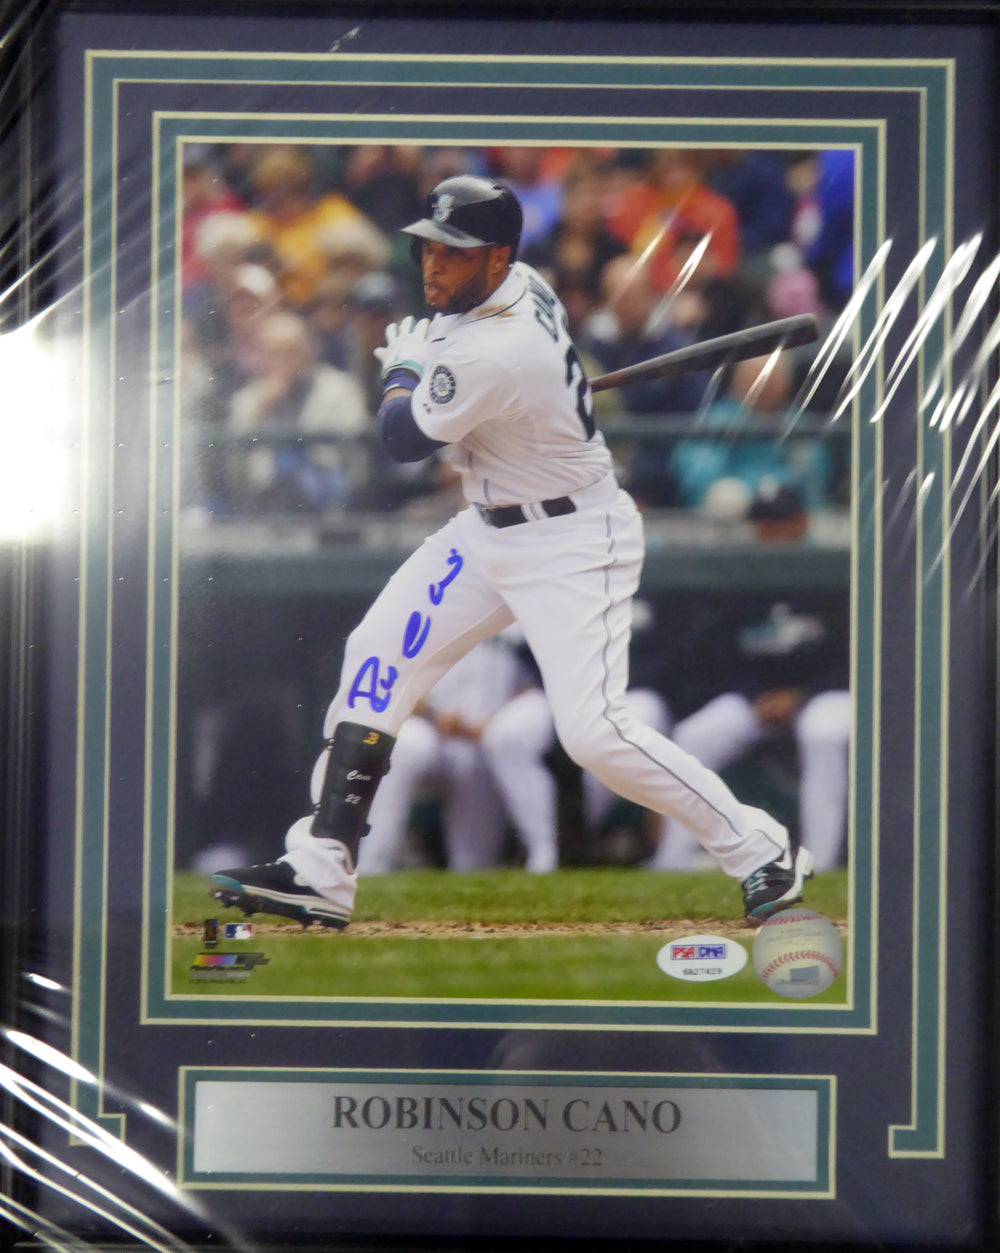 Robinson Cano Autographed Framed 8x10 Photo Seattle Mariners PSA/DNA Stock #107796